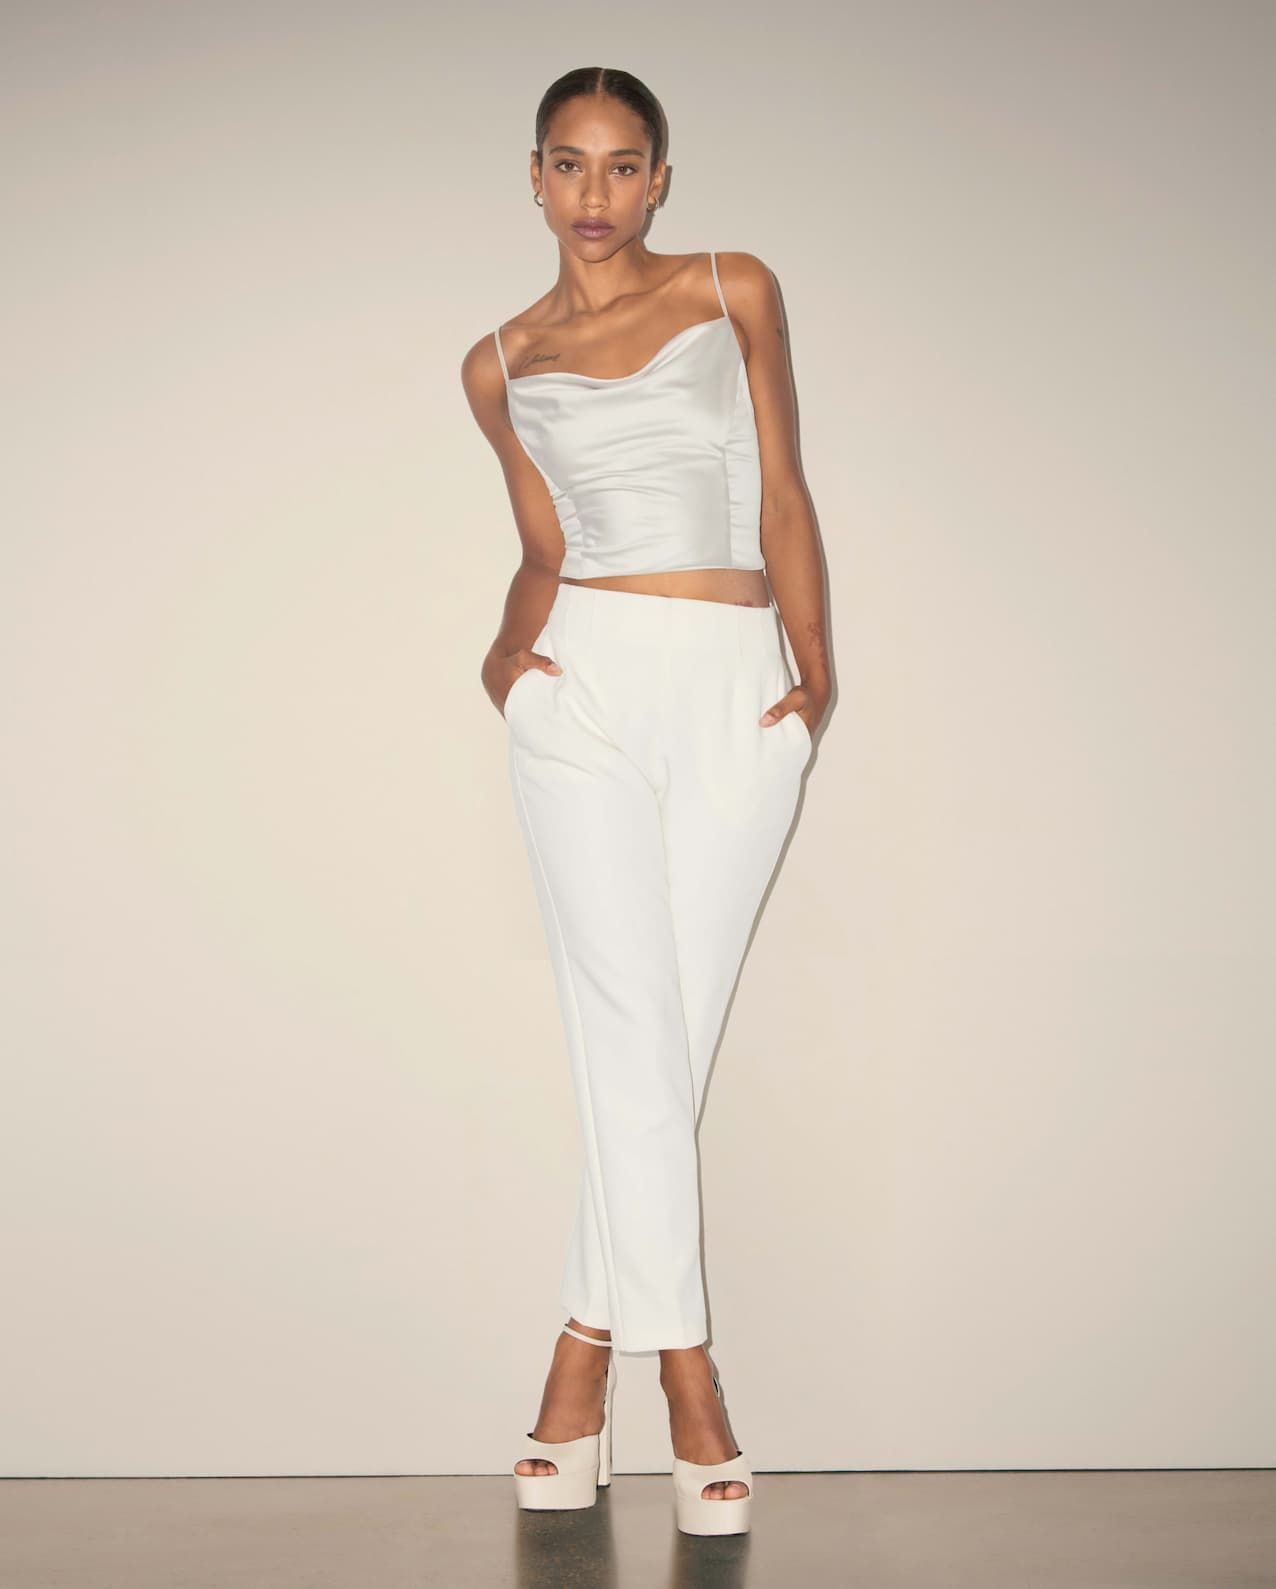 A model wears white slim leg pants with a white bustier top.